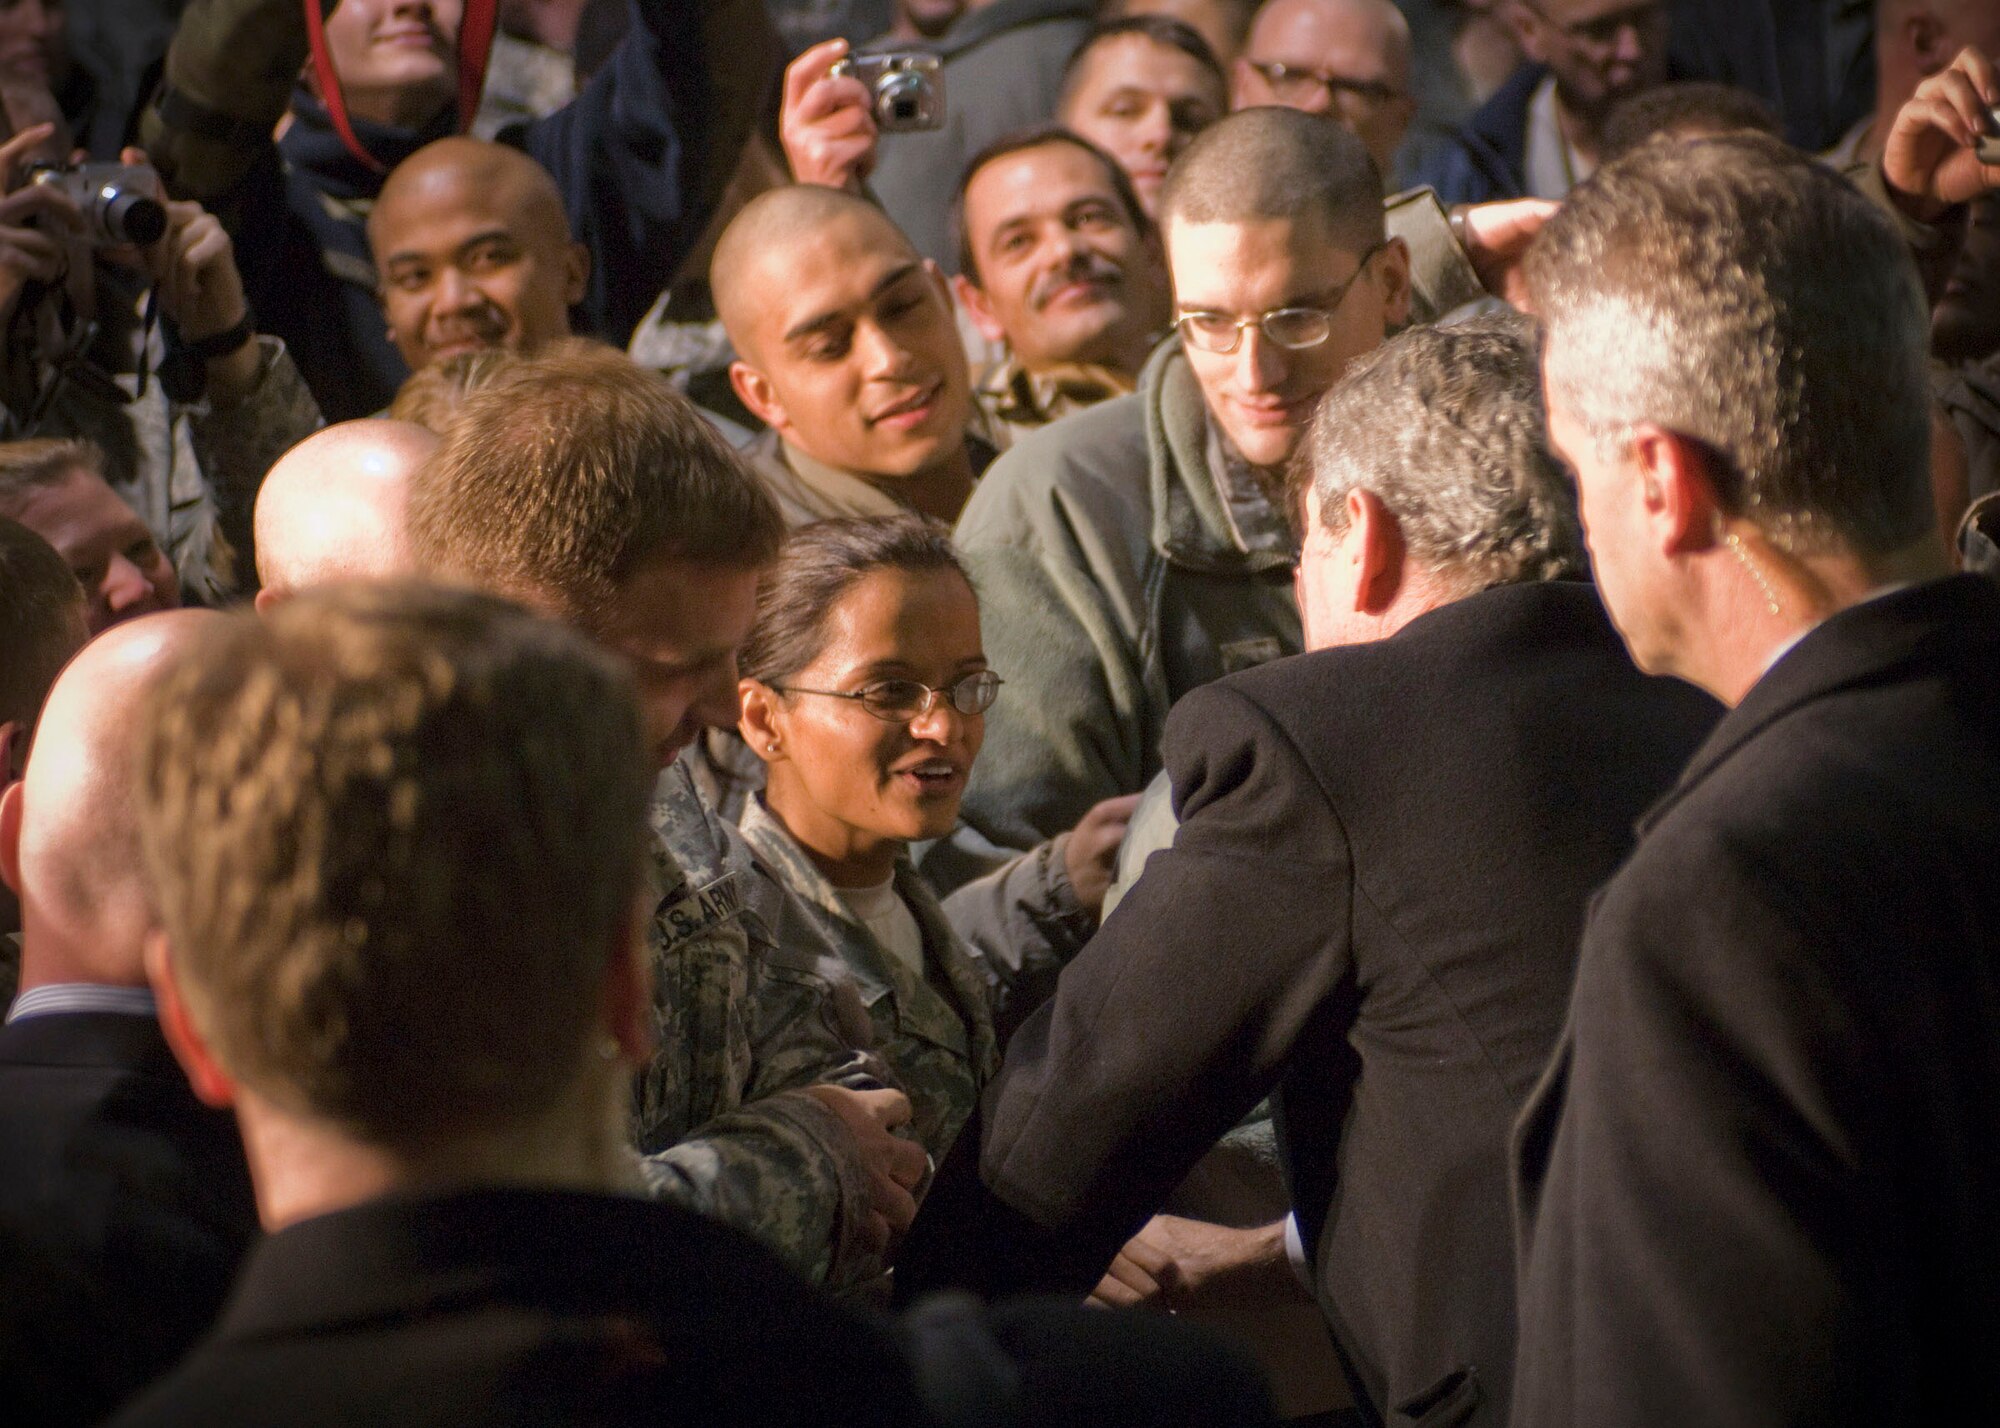 President George W. Bush greets Tech. Sgt. Roopa Schoop, a medical technician assigned to the Craig Joint Theater Hospital, and other servicemembers during a visit to Bagram Air Field, Afghanistan, Dec. 15. After thanking them for their service in Afghanistan, President Bush took time individually greet servicemembers and pose for photos. (U.S. Air Force photo by Staff Sgt. Rachel Martinez) (Released)